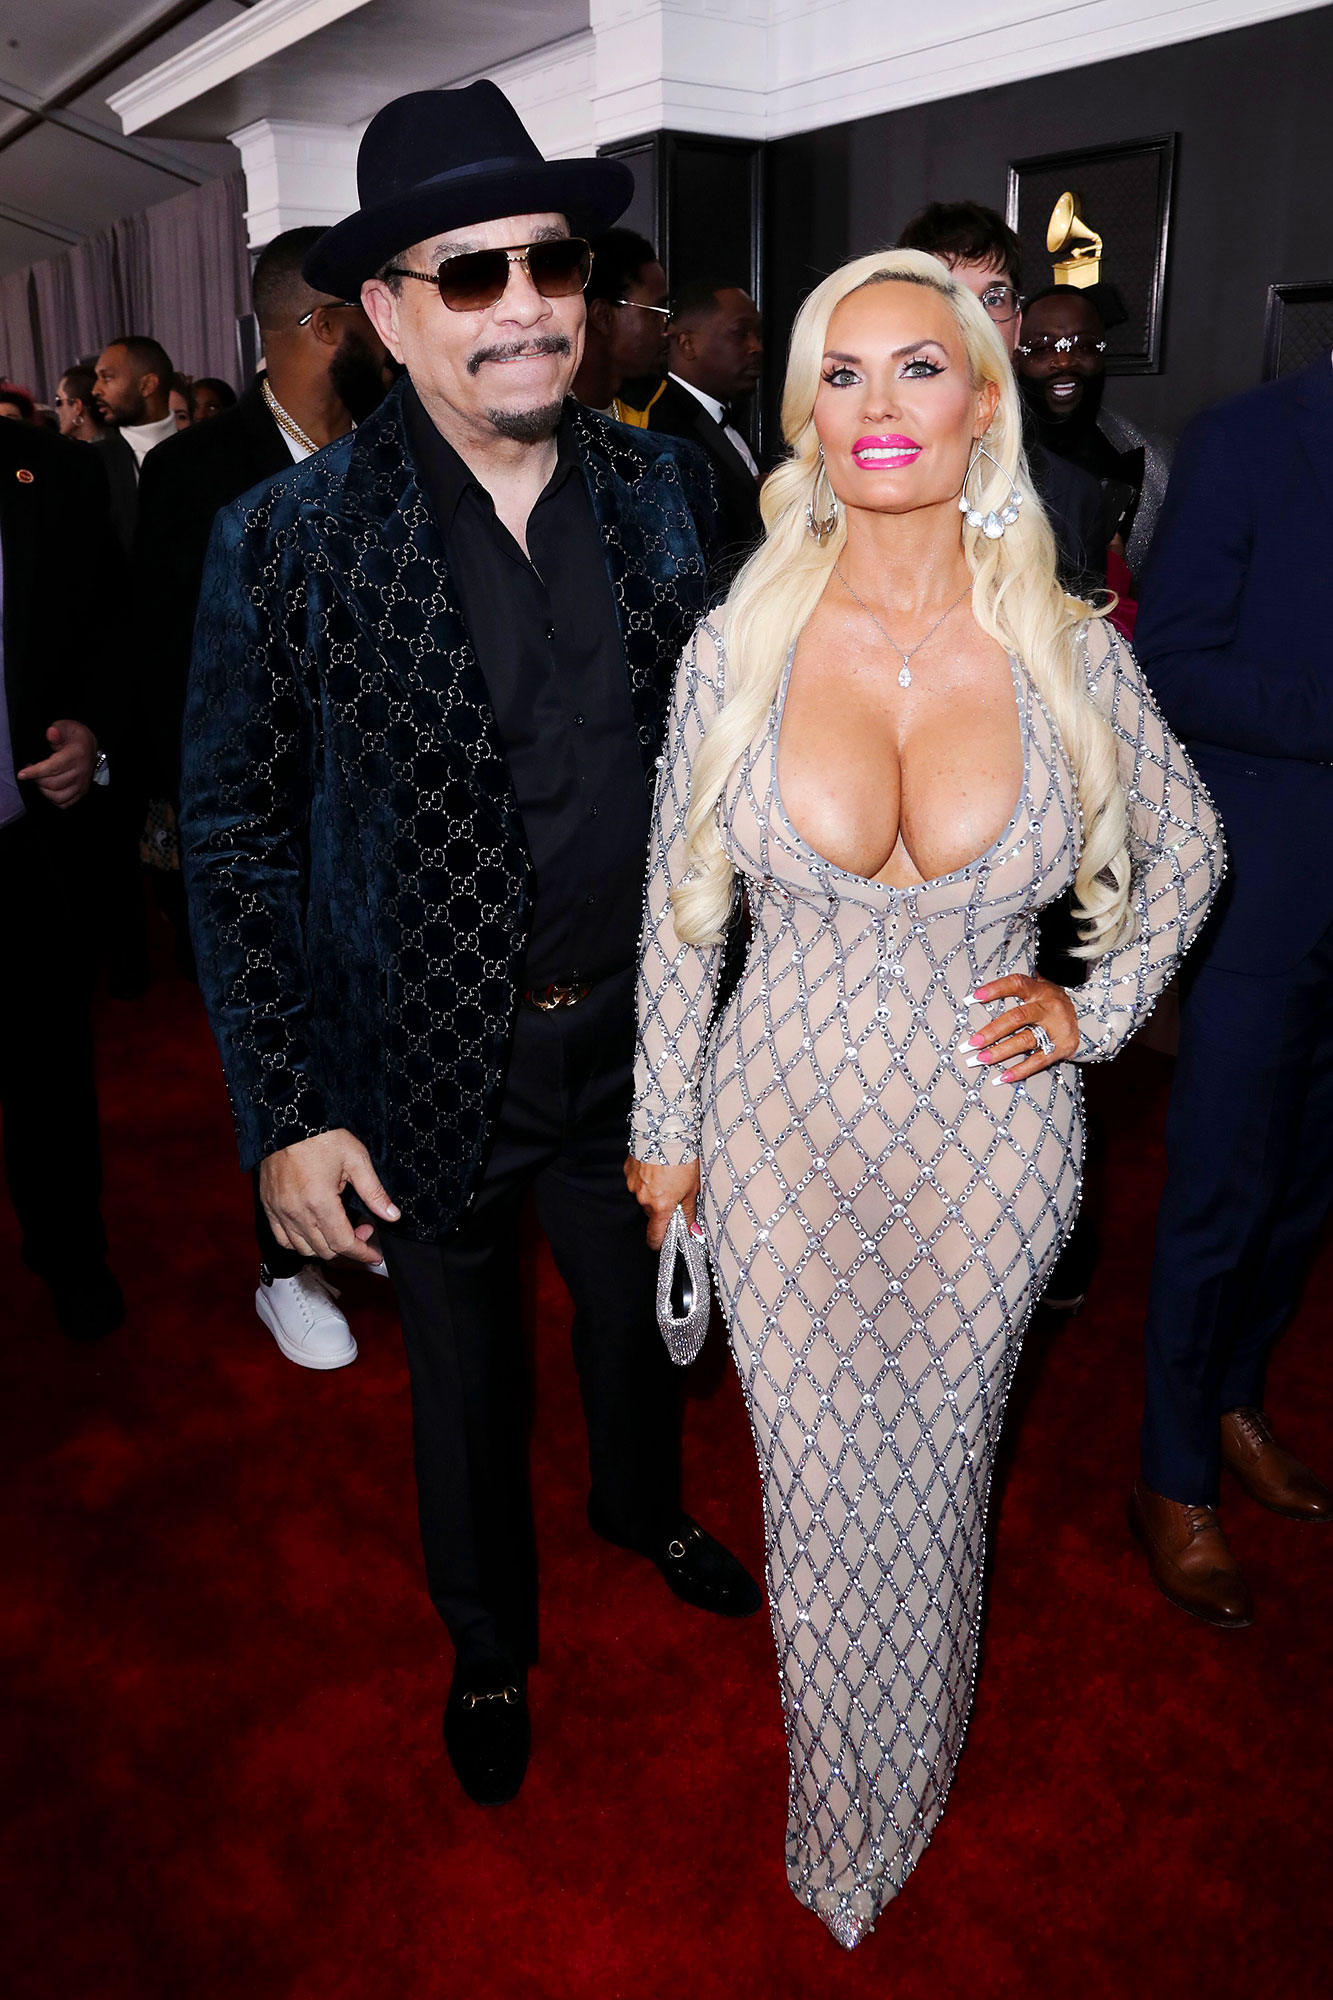 Ice-T Slams Troll Over Claims Coco Austins Dress Was Too Small pic pic